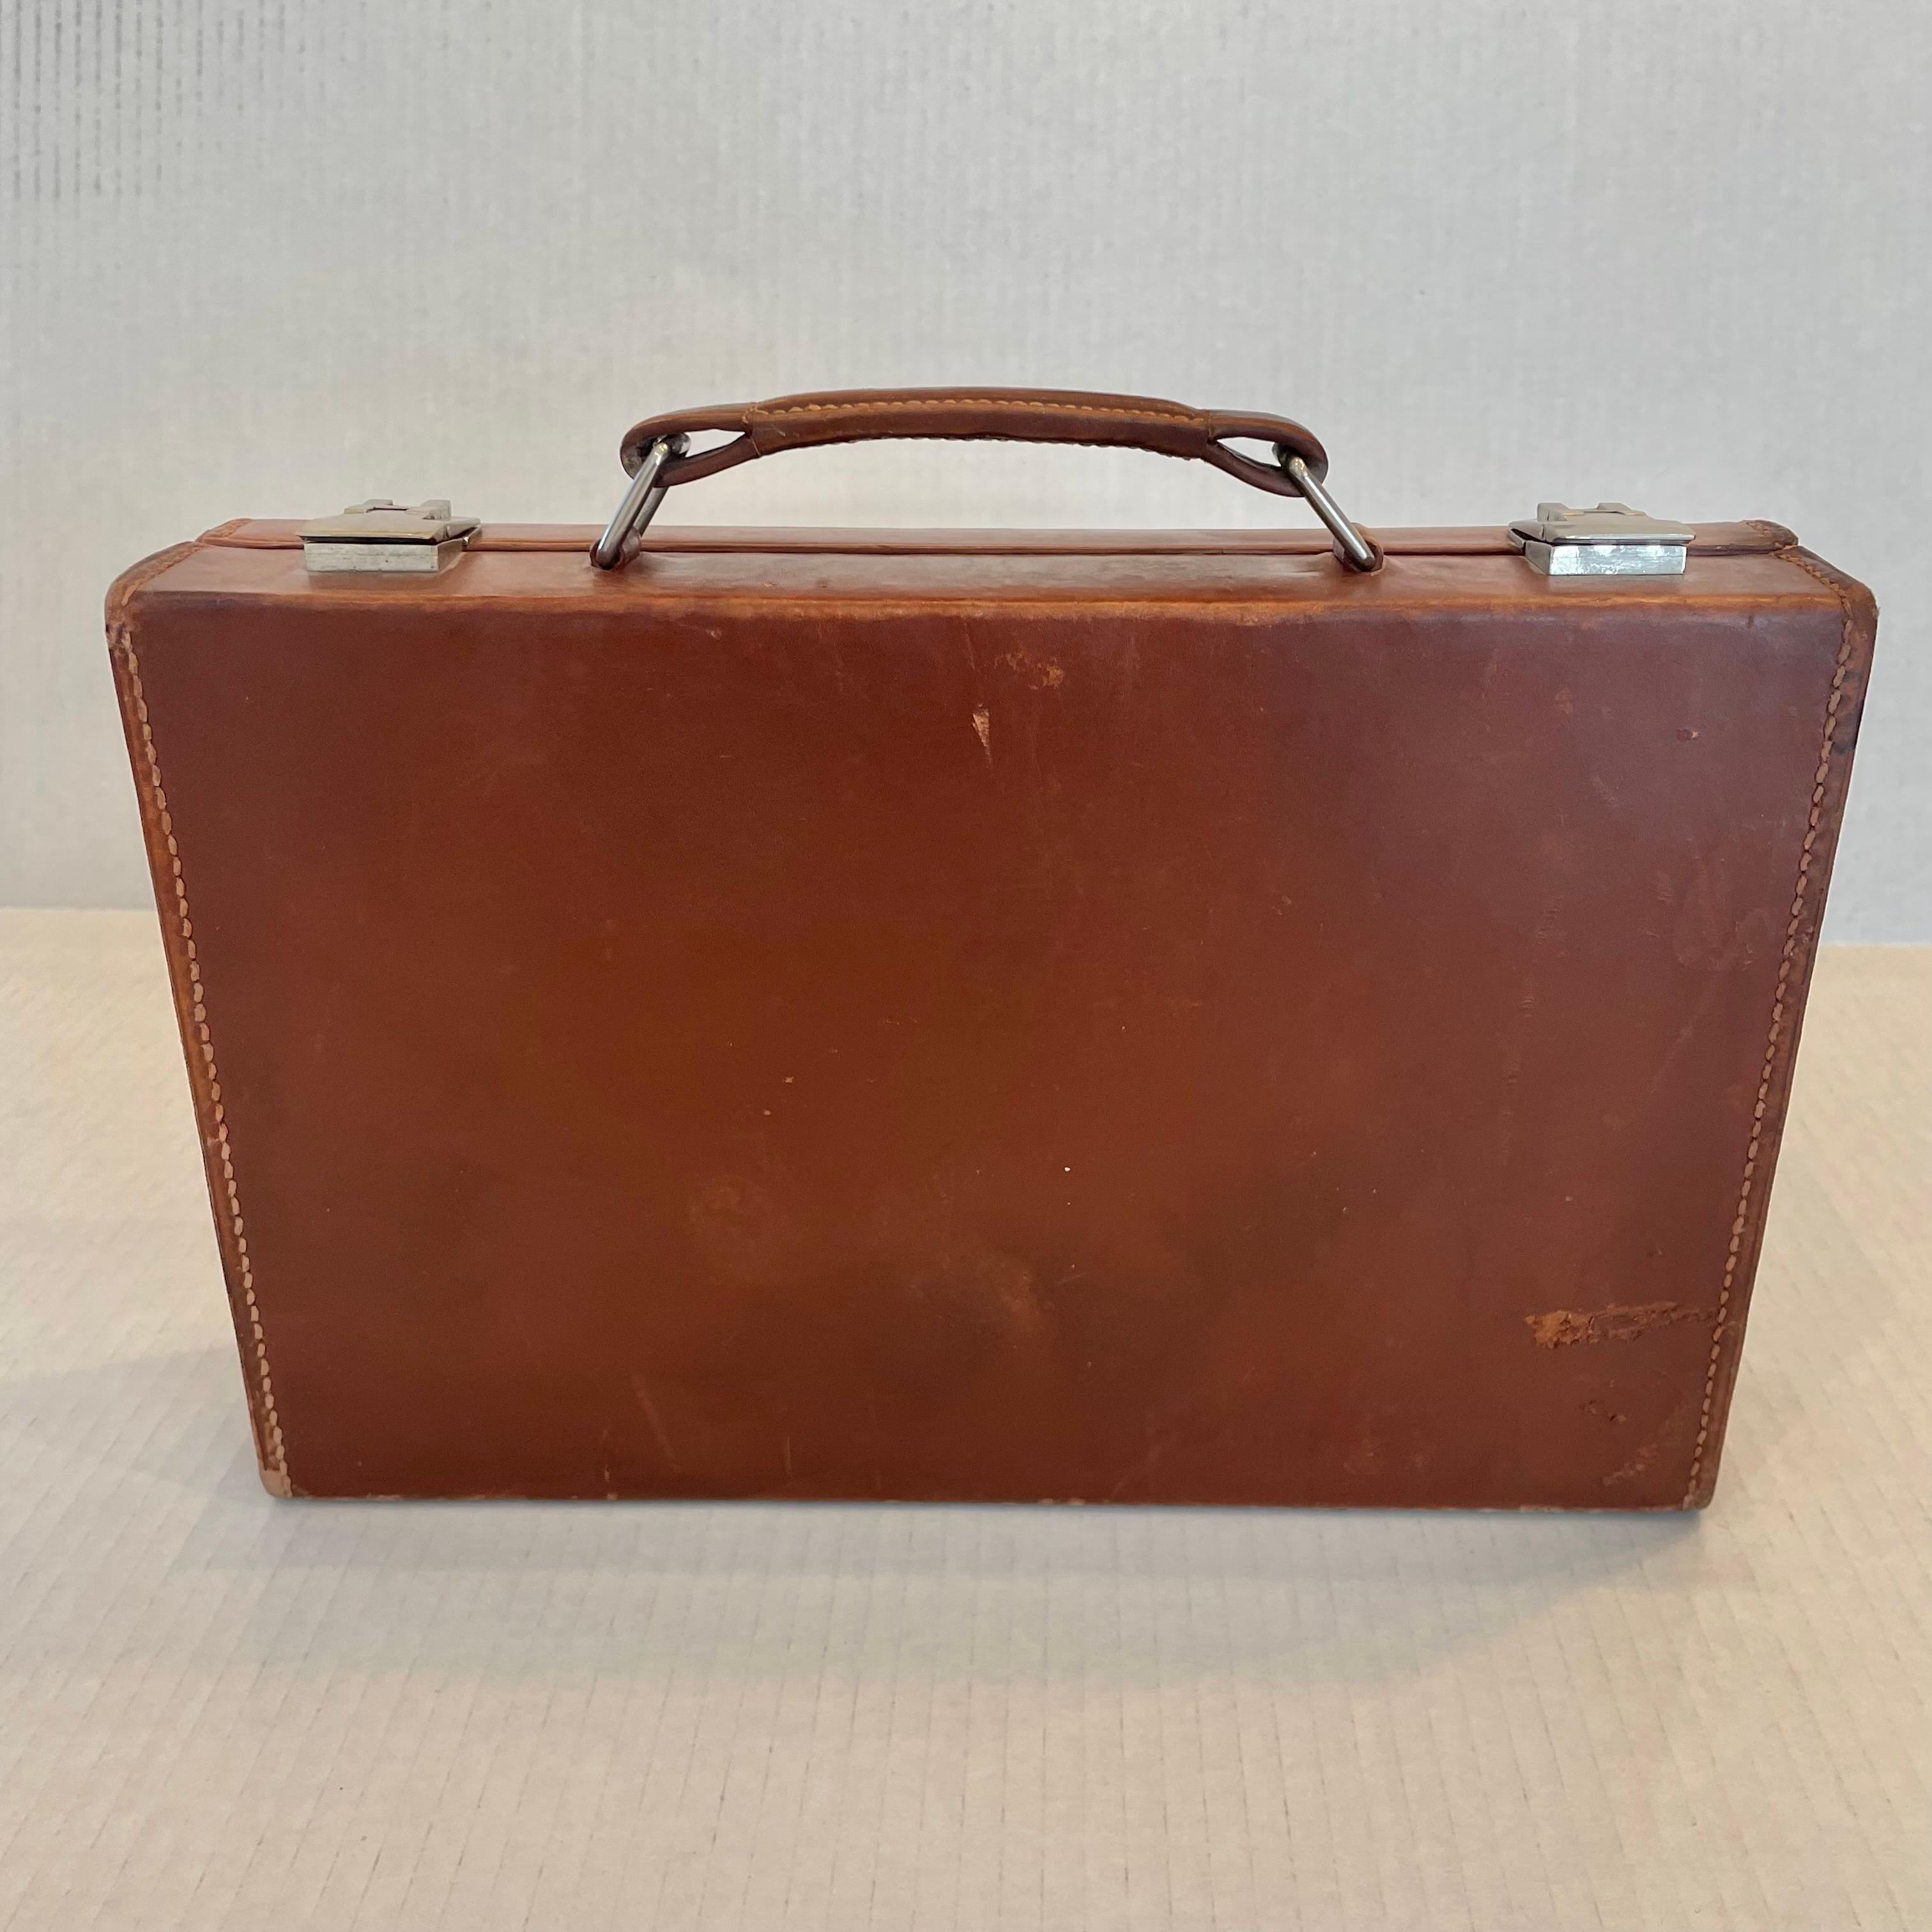 Hermès Saddle Leather Shaving Case, 1950s France In Good Condition For Sale In Los Angeles, CA